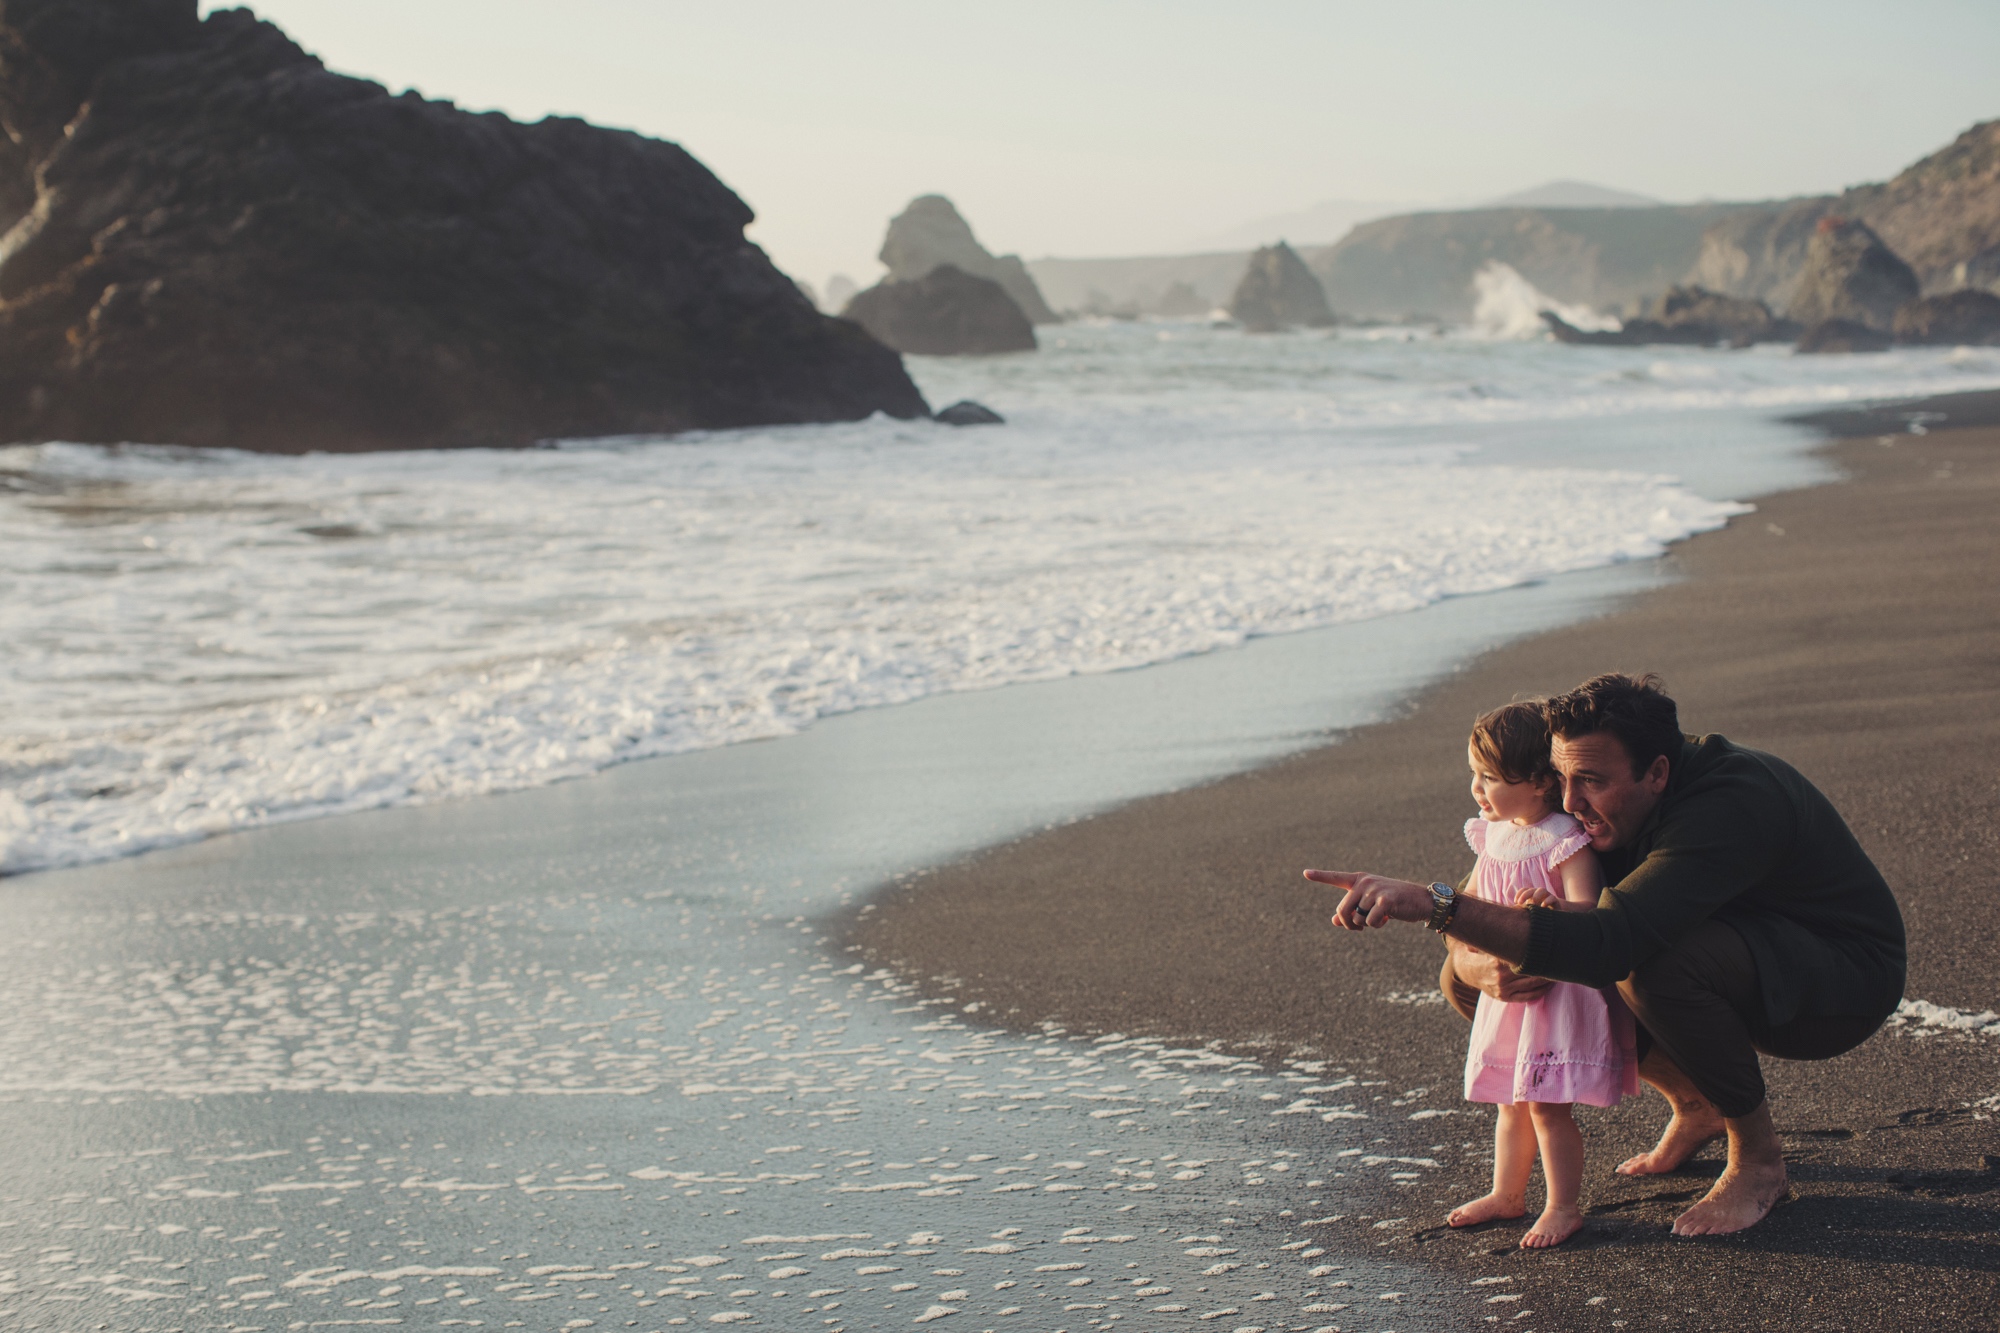 Beach Family Session 